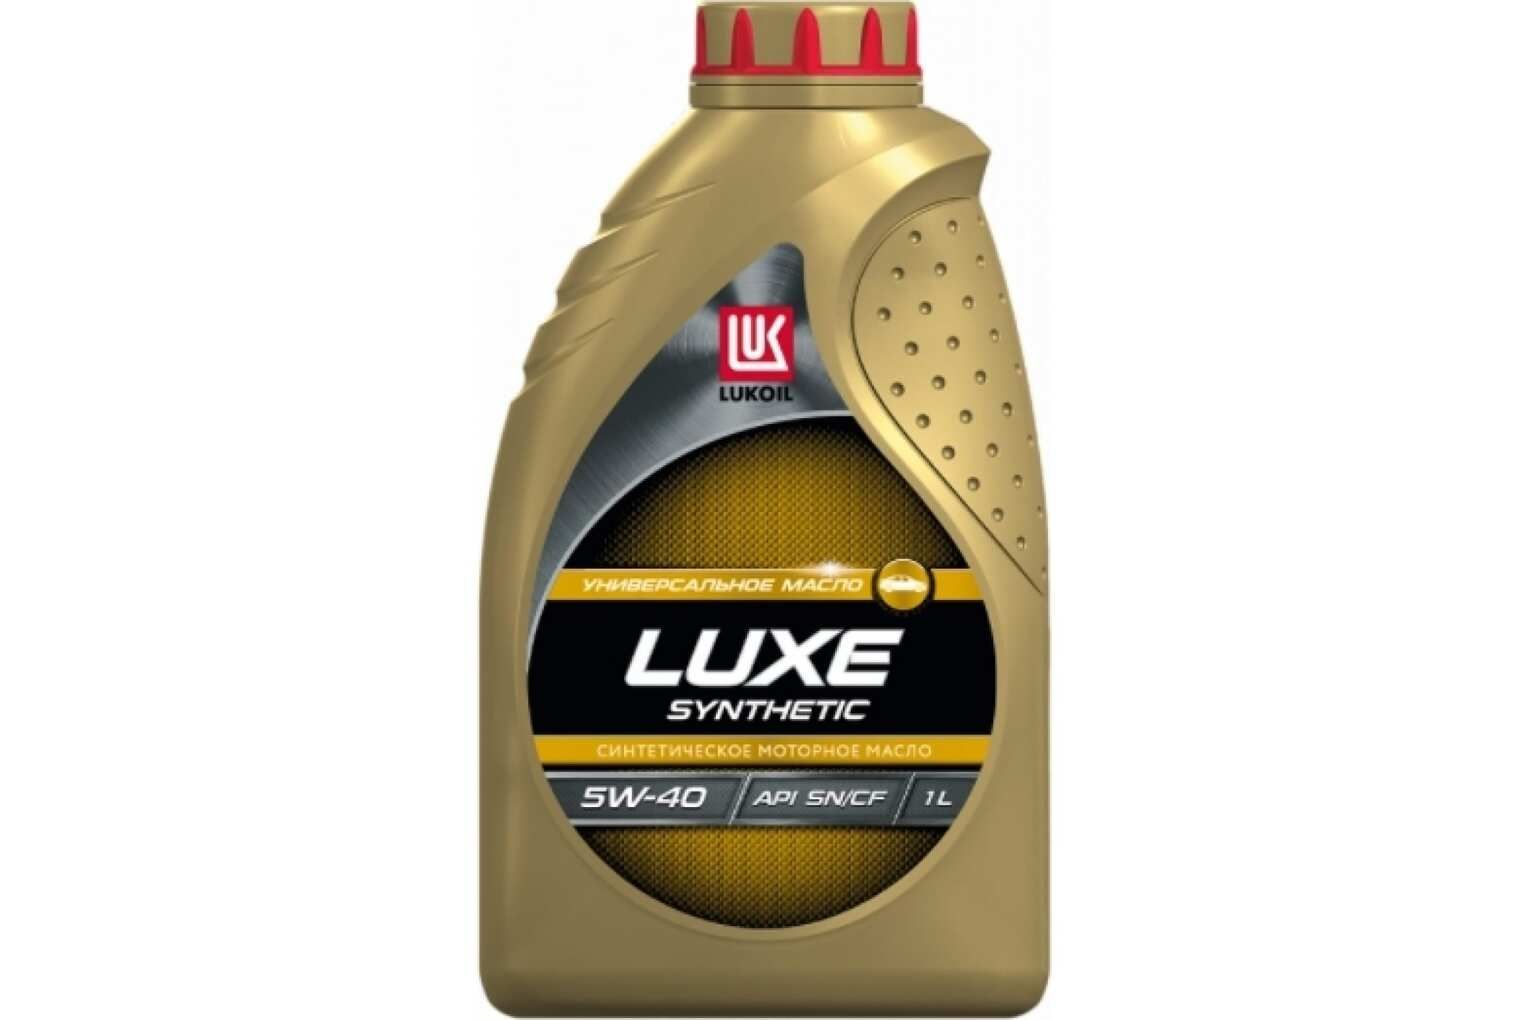 Масло лукойл sn 5w40. Lukoil Luxe 5w-40. Lukoil Luxe 10w-40 5l. Лукойл Люкс 5w30 синтетика 5л. Лукойл Люкс 5w40 SN.